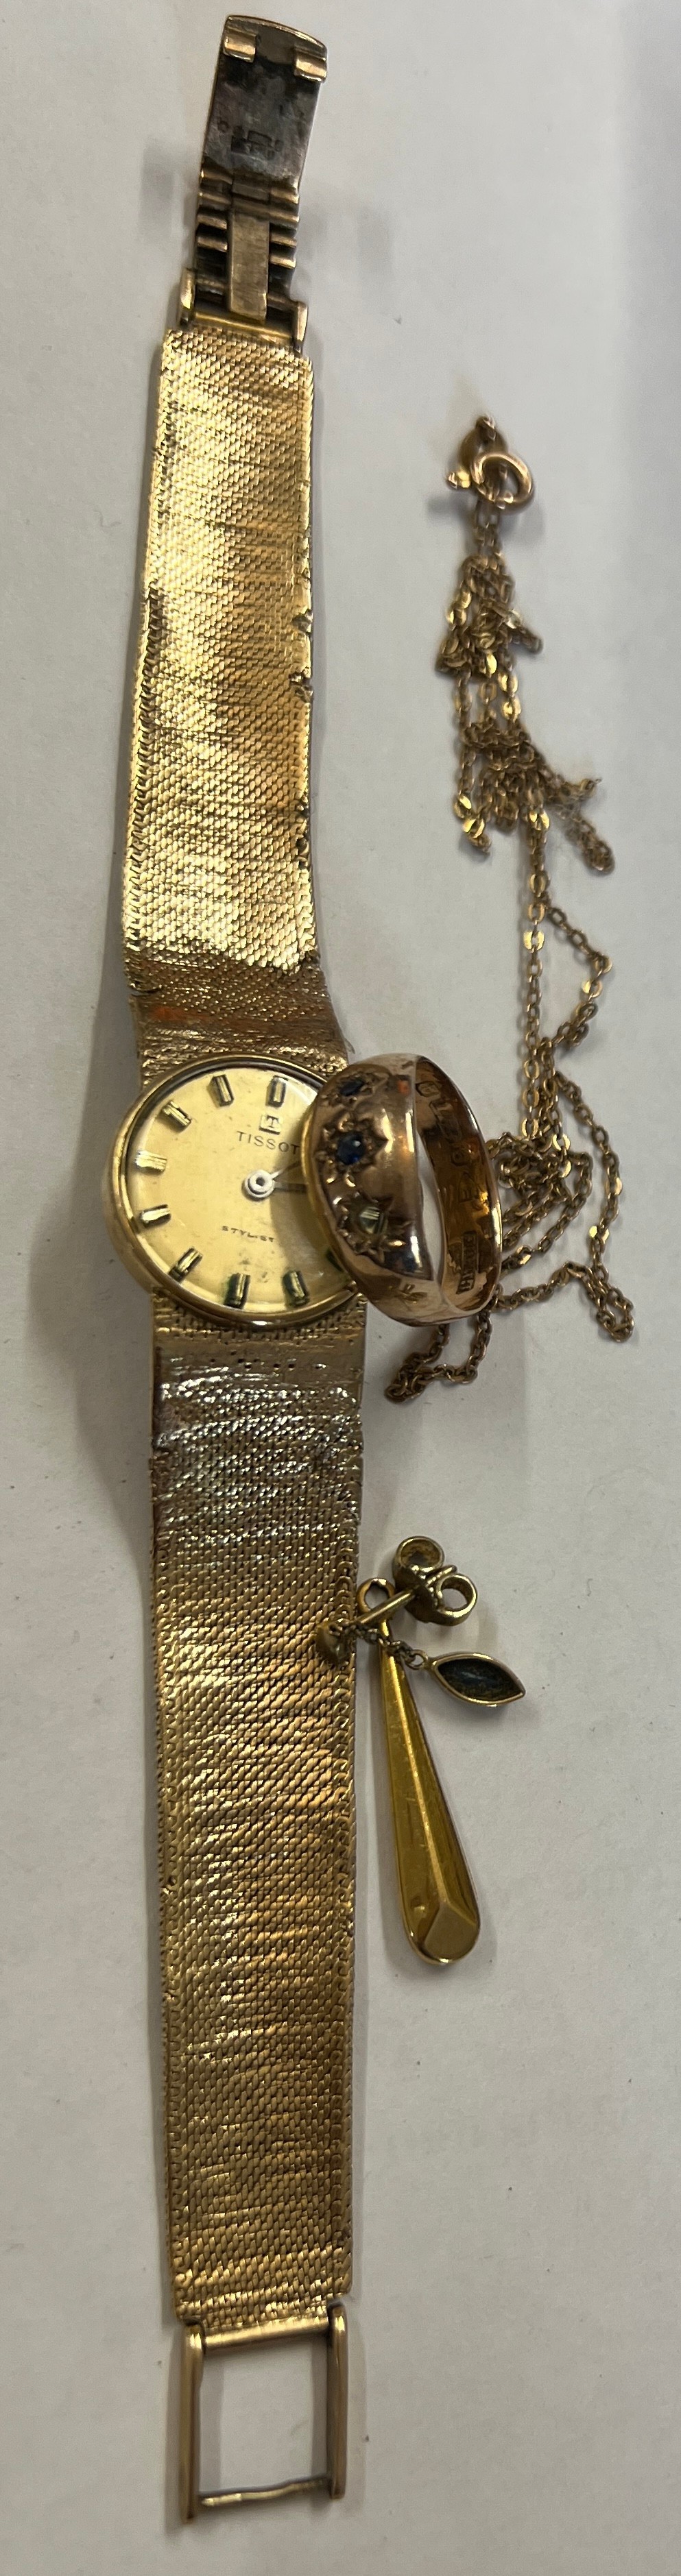 Nine carat gold Tissot watch and strap, gem set ring and unmarked chain and two odd earrings. - Image 2 of 3